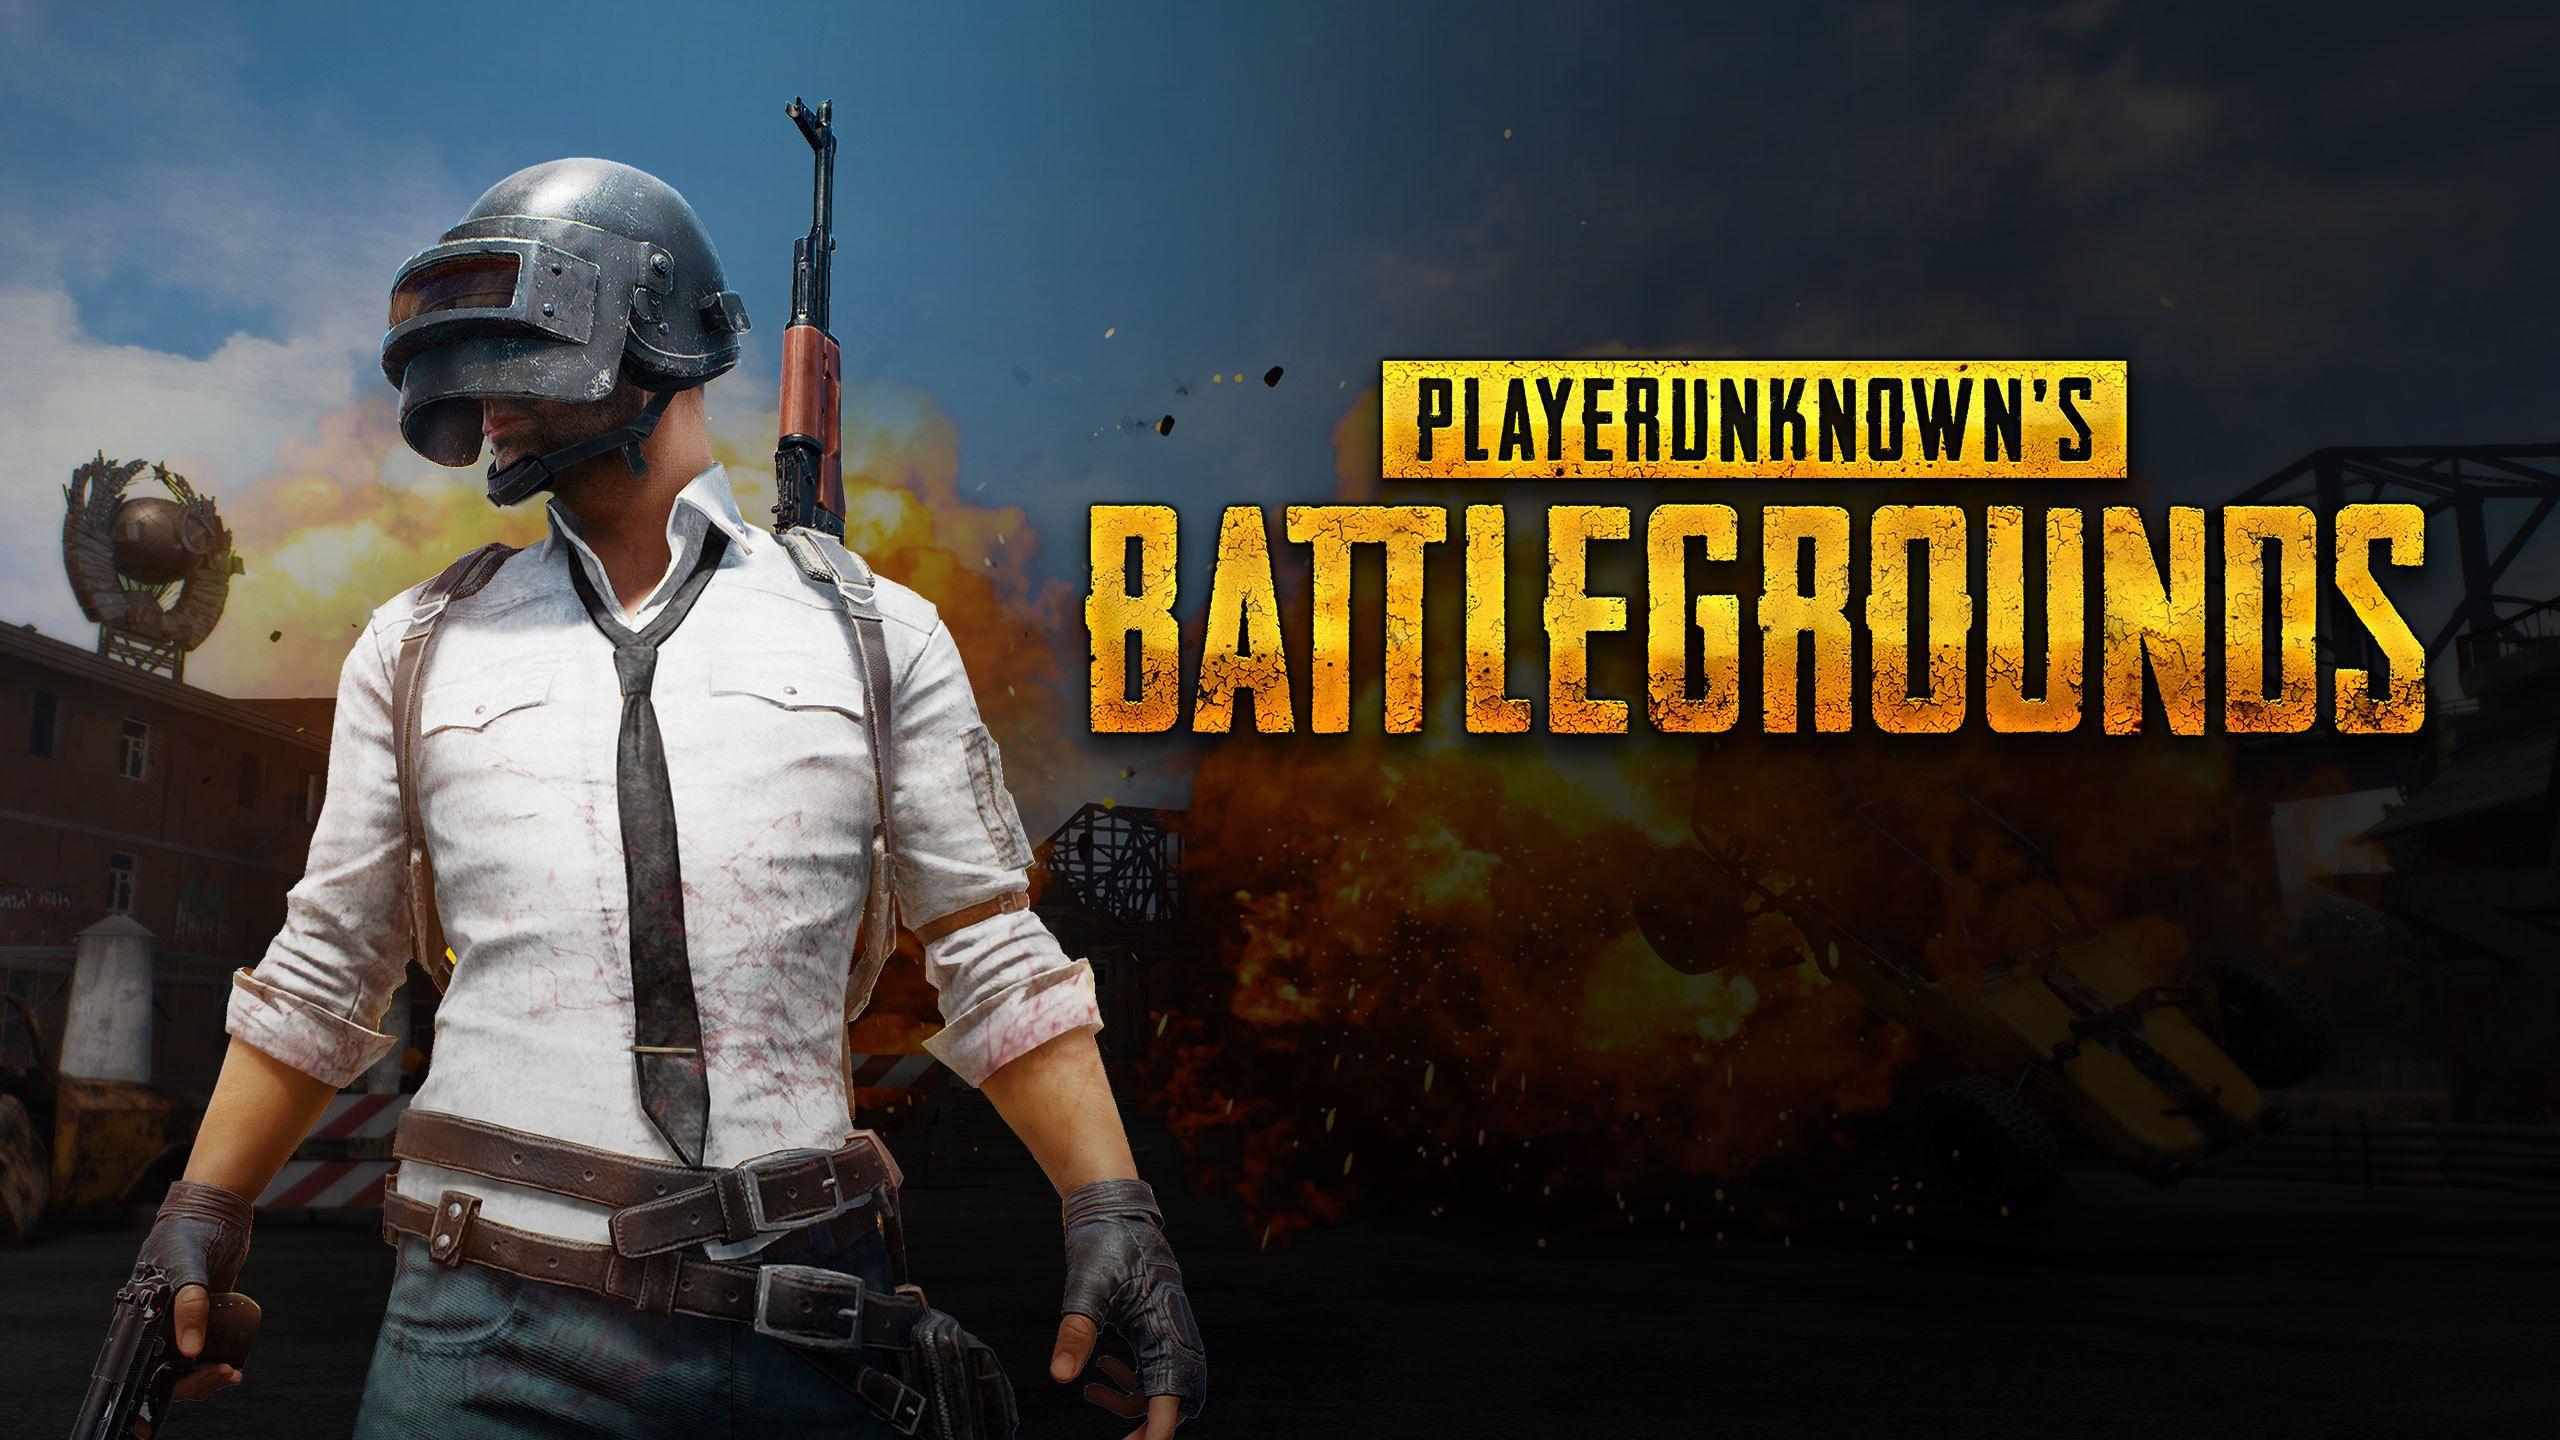 PUBG briefly surpassed Dota 2 in concurrent players becoming